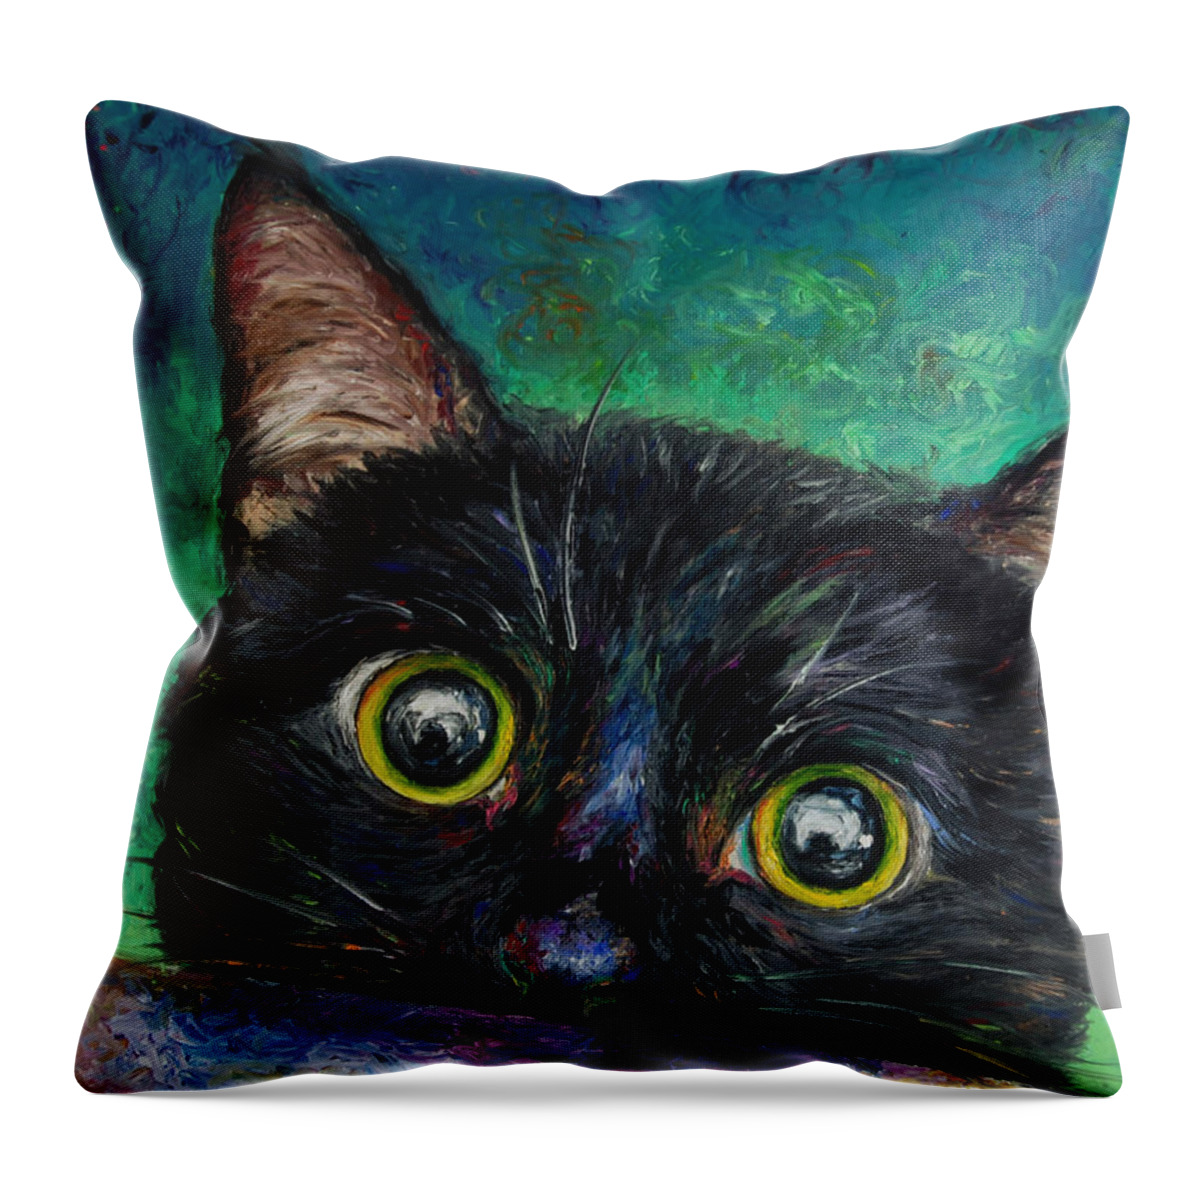 Catart Throw Pillow featuring the painting Lenny by Hafsa Idrees